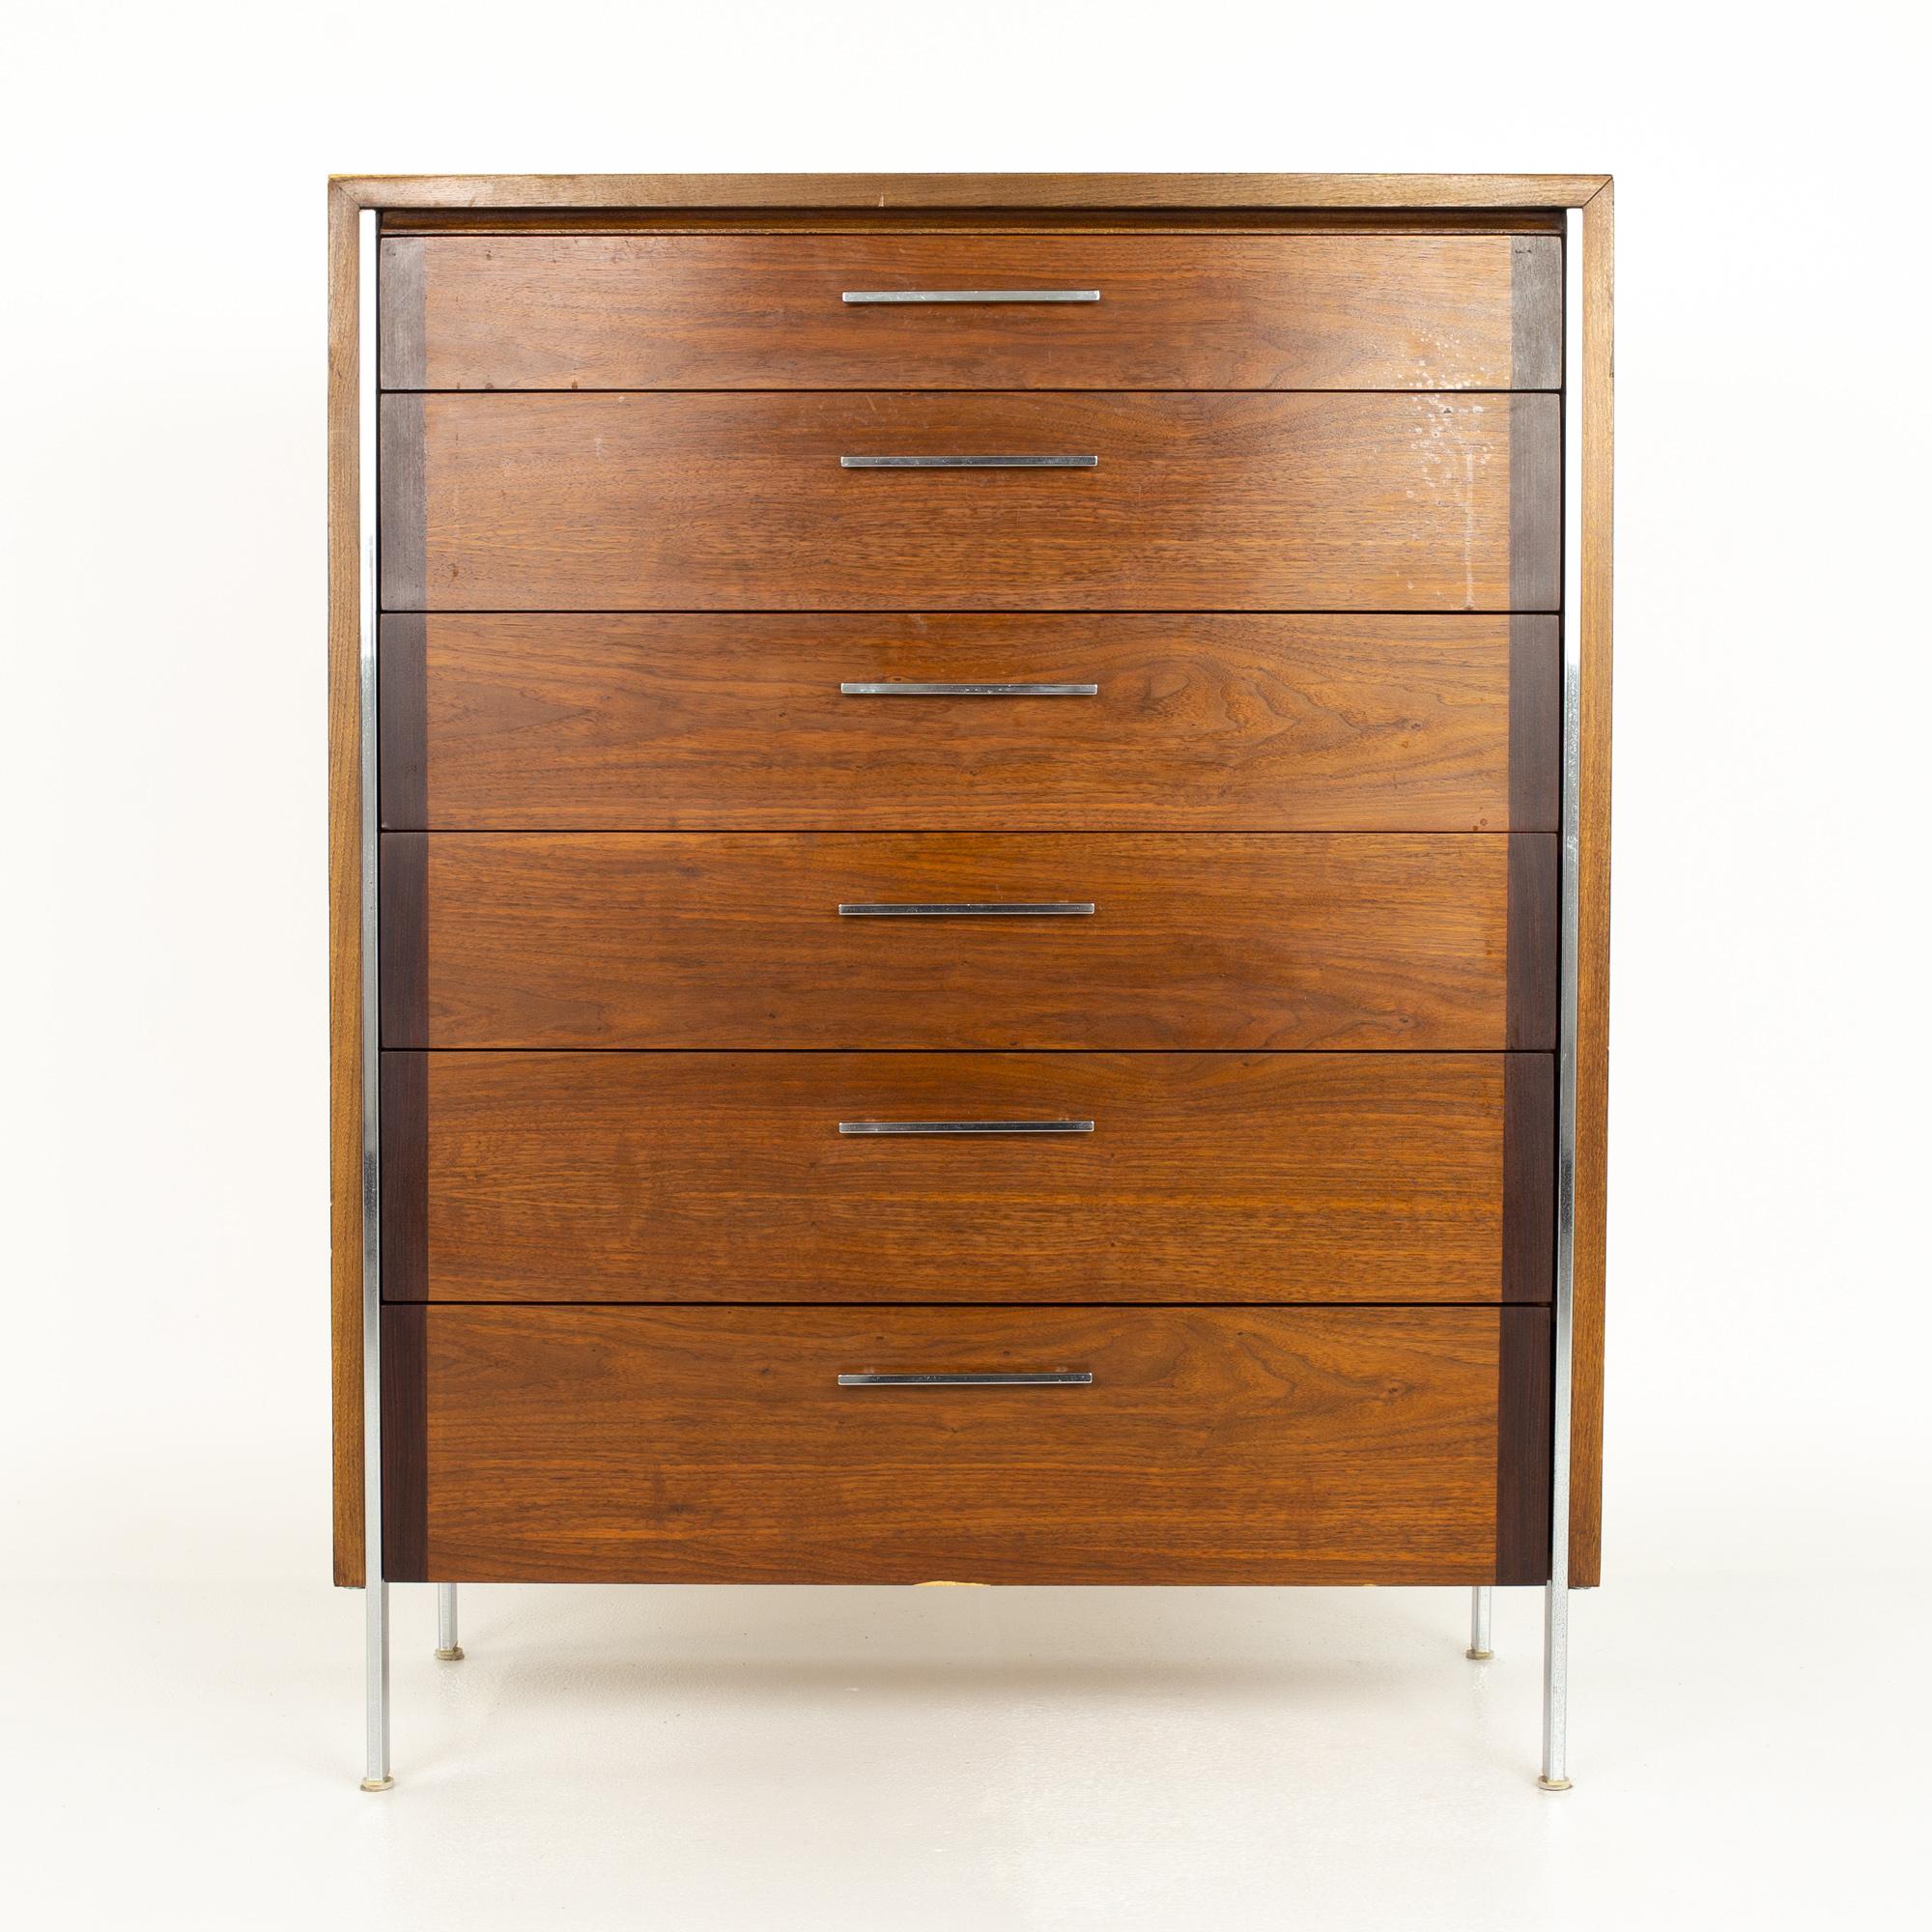 Paul McCobb style lane mid century walnut and chrome 6 drawer highboy dresser.

This dresser measures: 38 wide x 18 deep x 48 inches high

?All pieces of furniture can be had in what we call restored vintage condition. That means the piece is